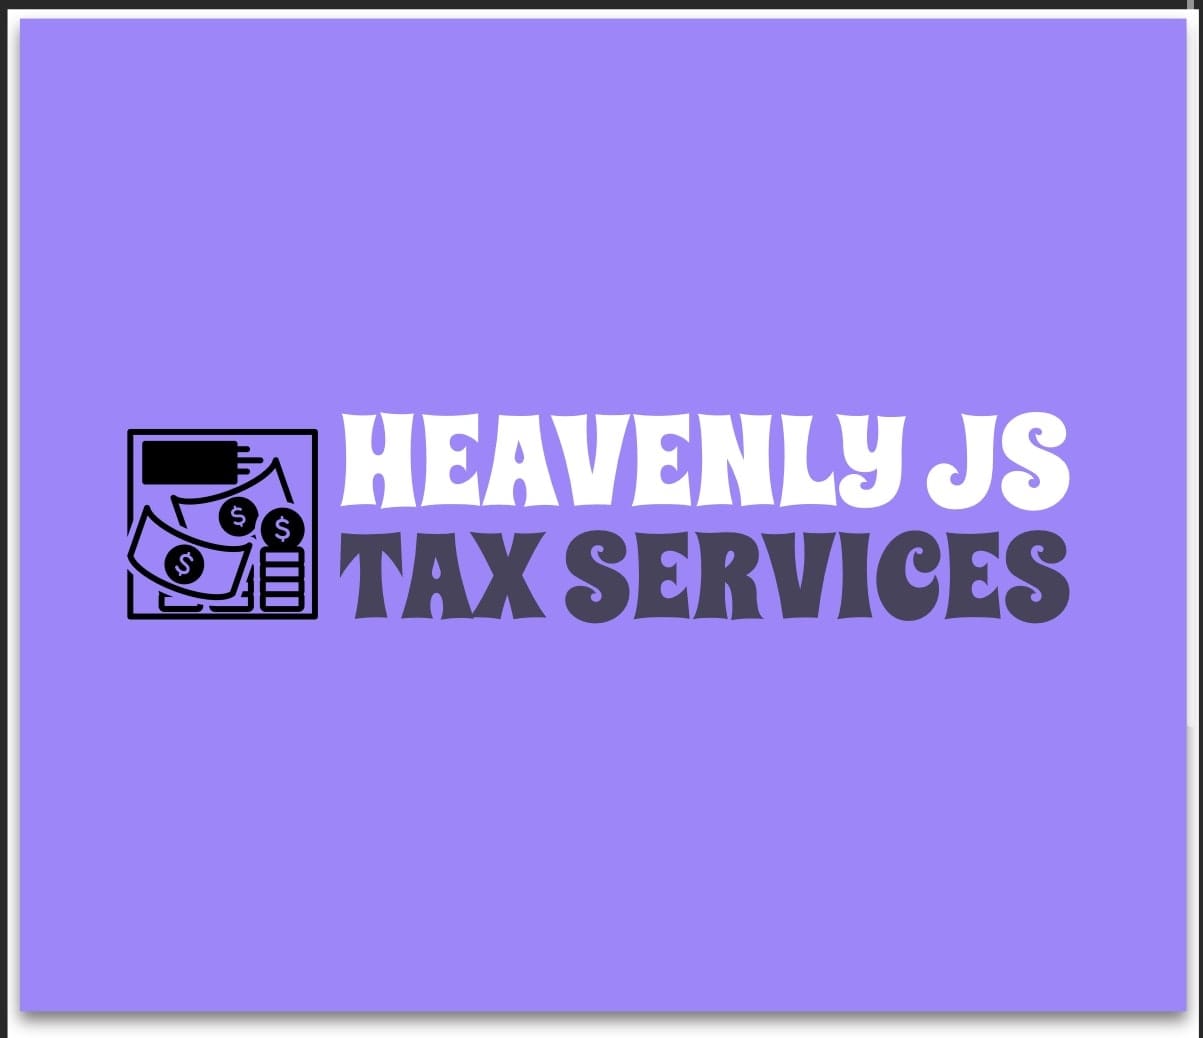 Heavenly J's Tax Services